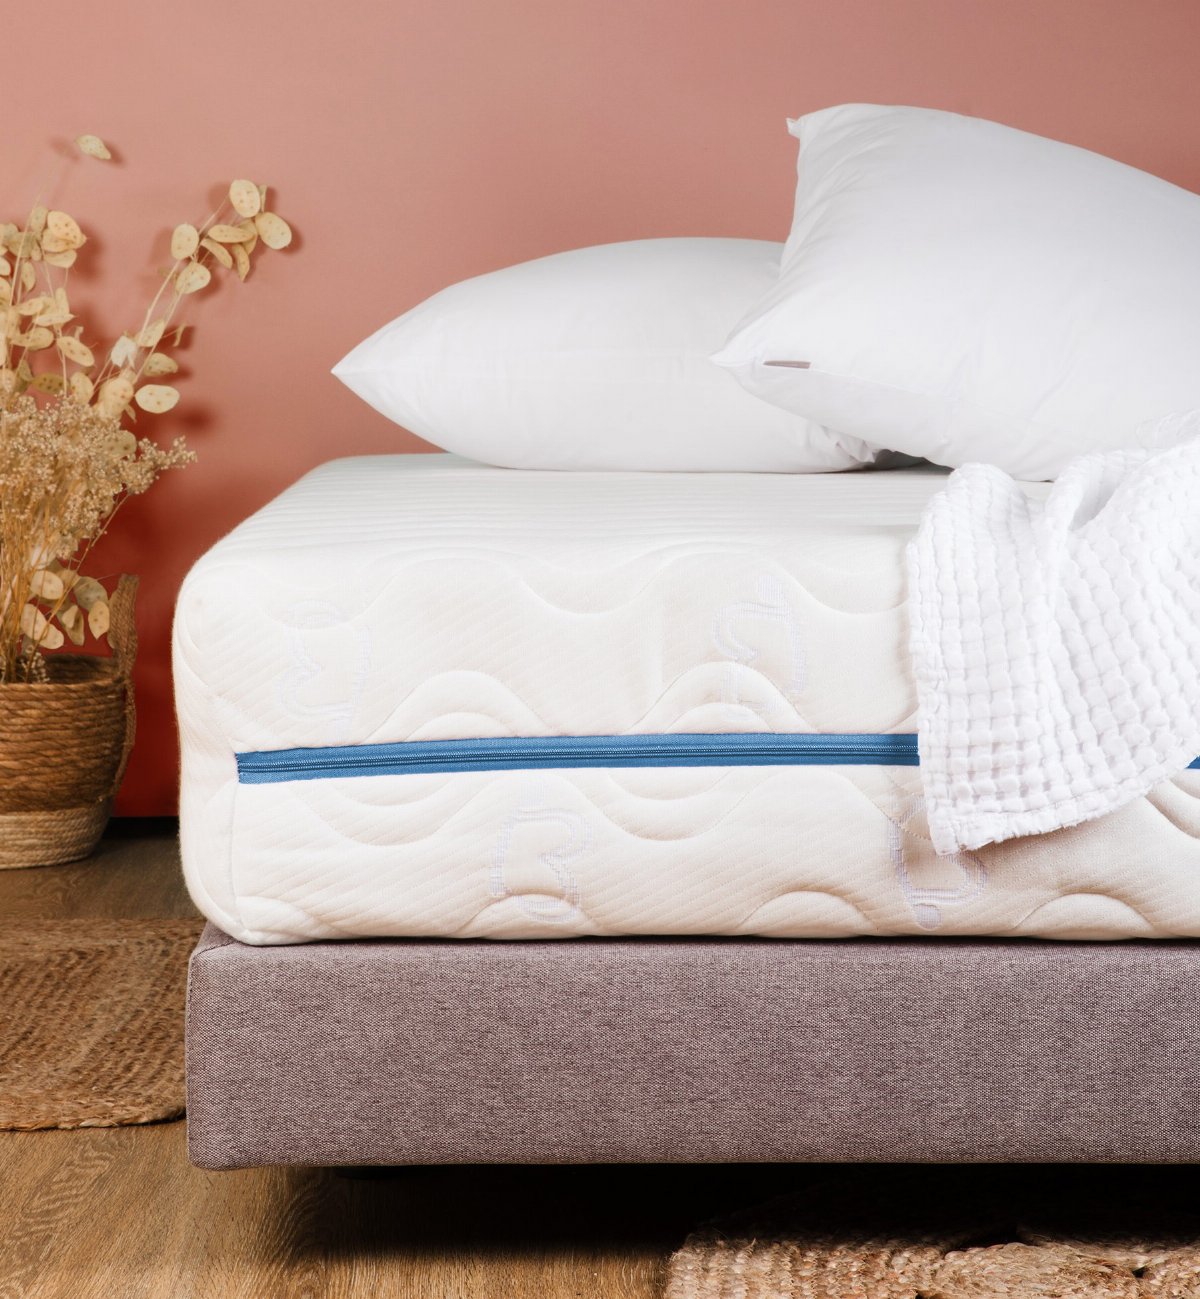 Adult Mattress Evolution Air with Wooden base and Kadolis legs